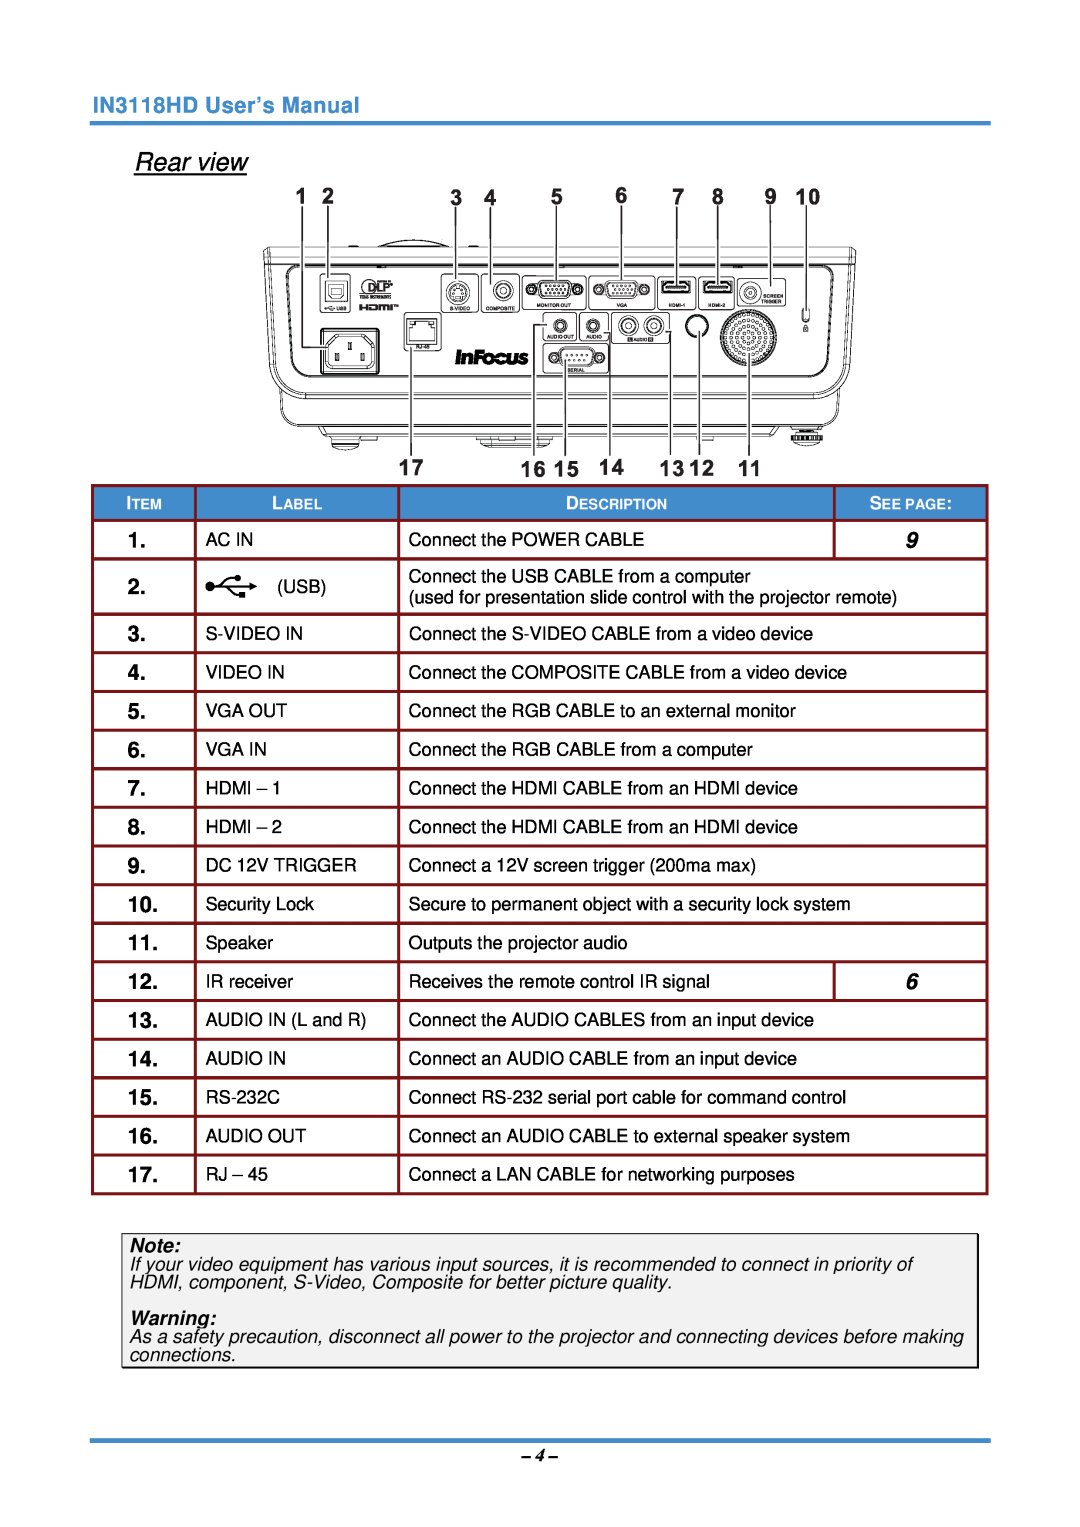 InFocus manual Rear view, IN3118HD User’s Manual, Label, Description, See Page 